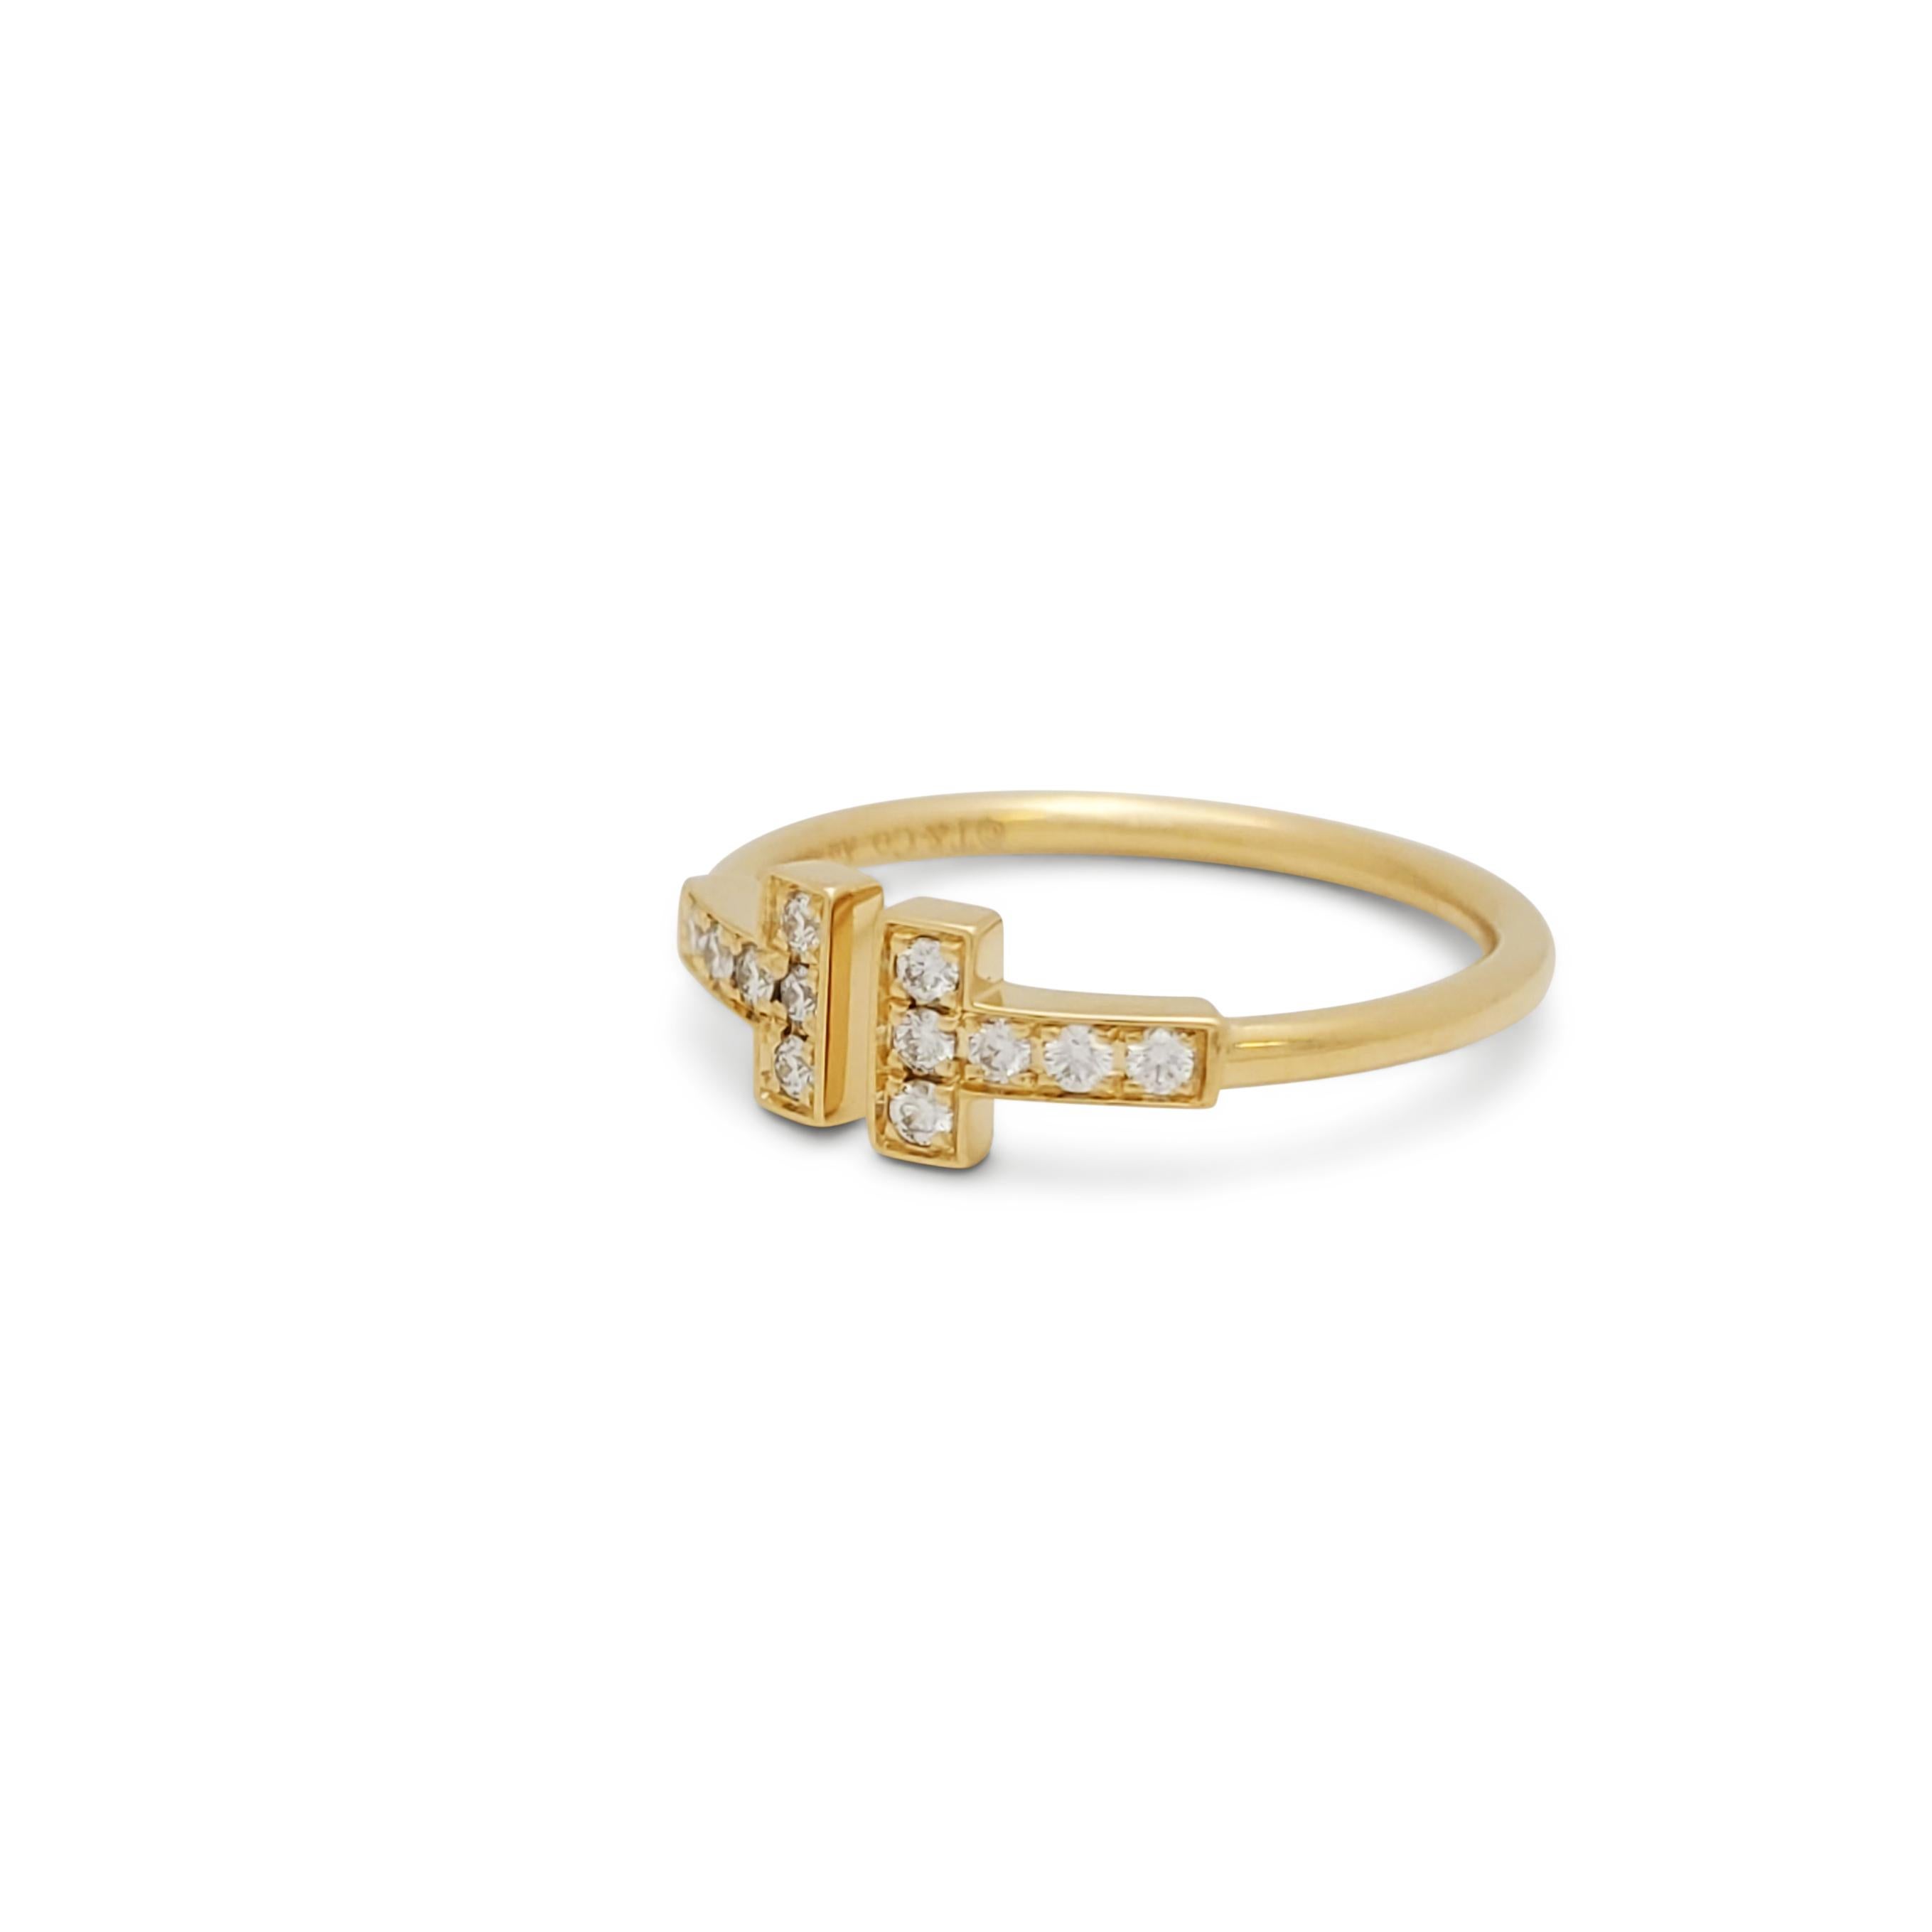 Authentic Tiffany & Co wire ring from the Tiffany T collection crafted in 18k Yellow Gold.  The bold T motif at the center of the ring is set with approximately 0.18 carats of round brilliant cut diamonds. Signed T&Co., AU750. Ring size 5 1/2 US. 